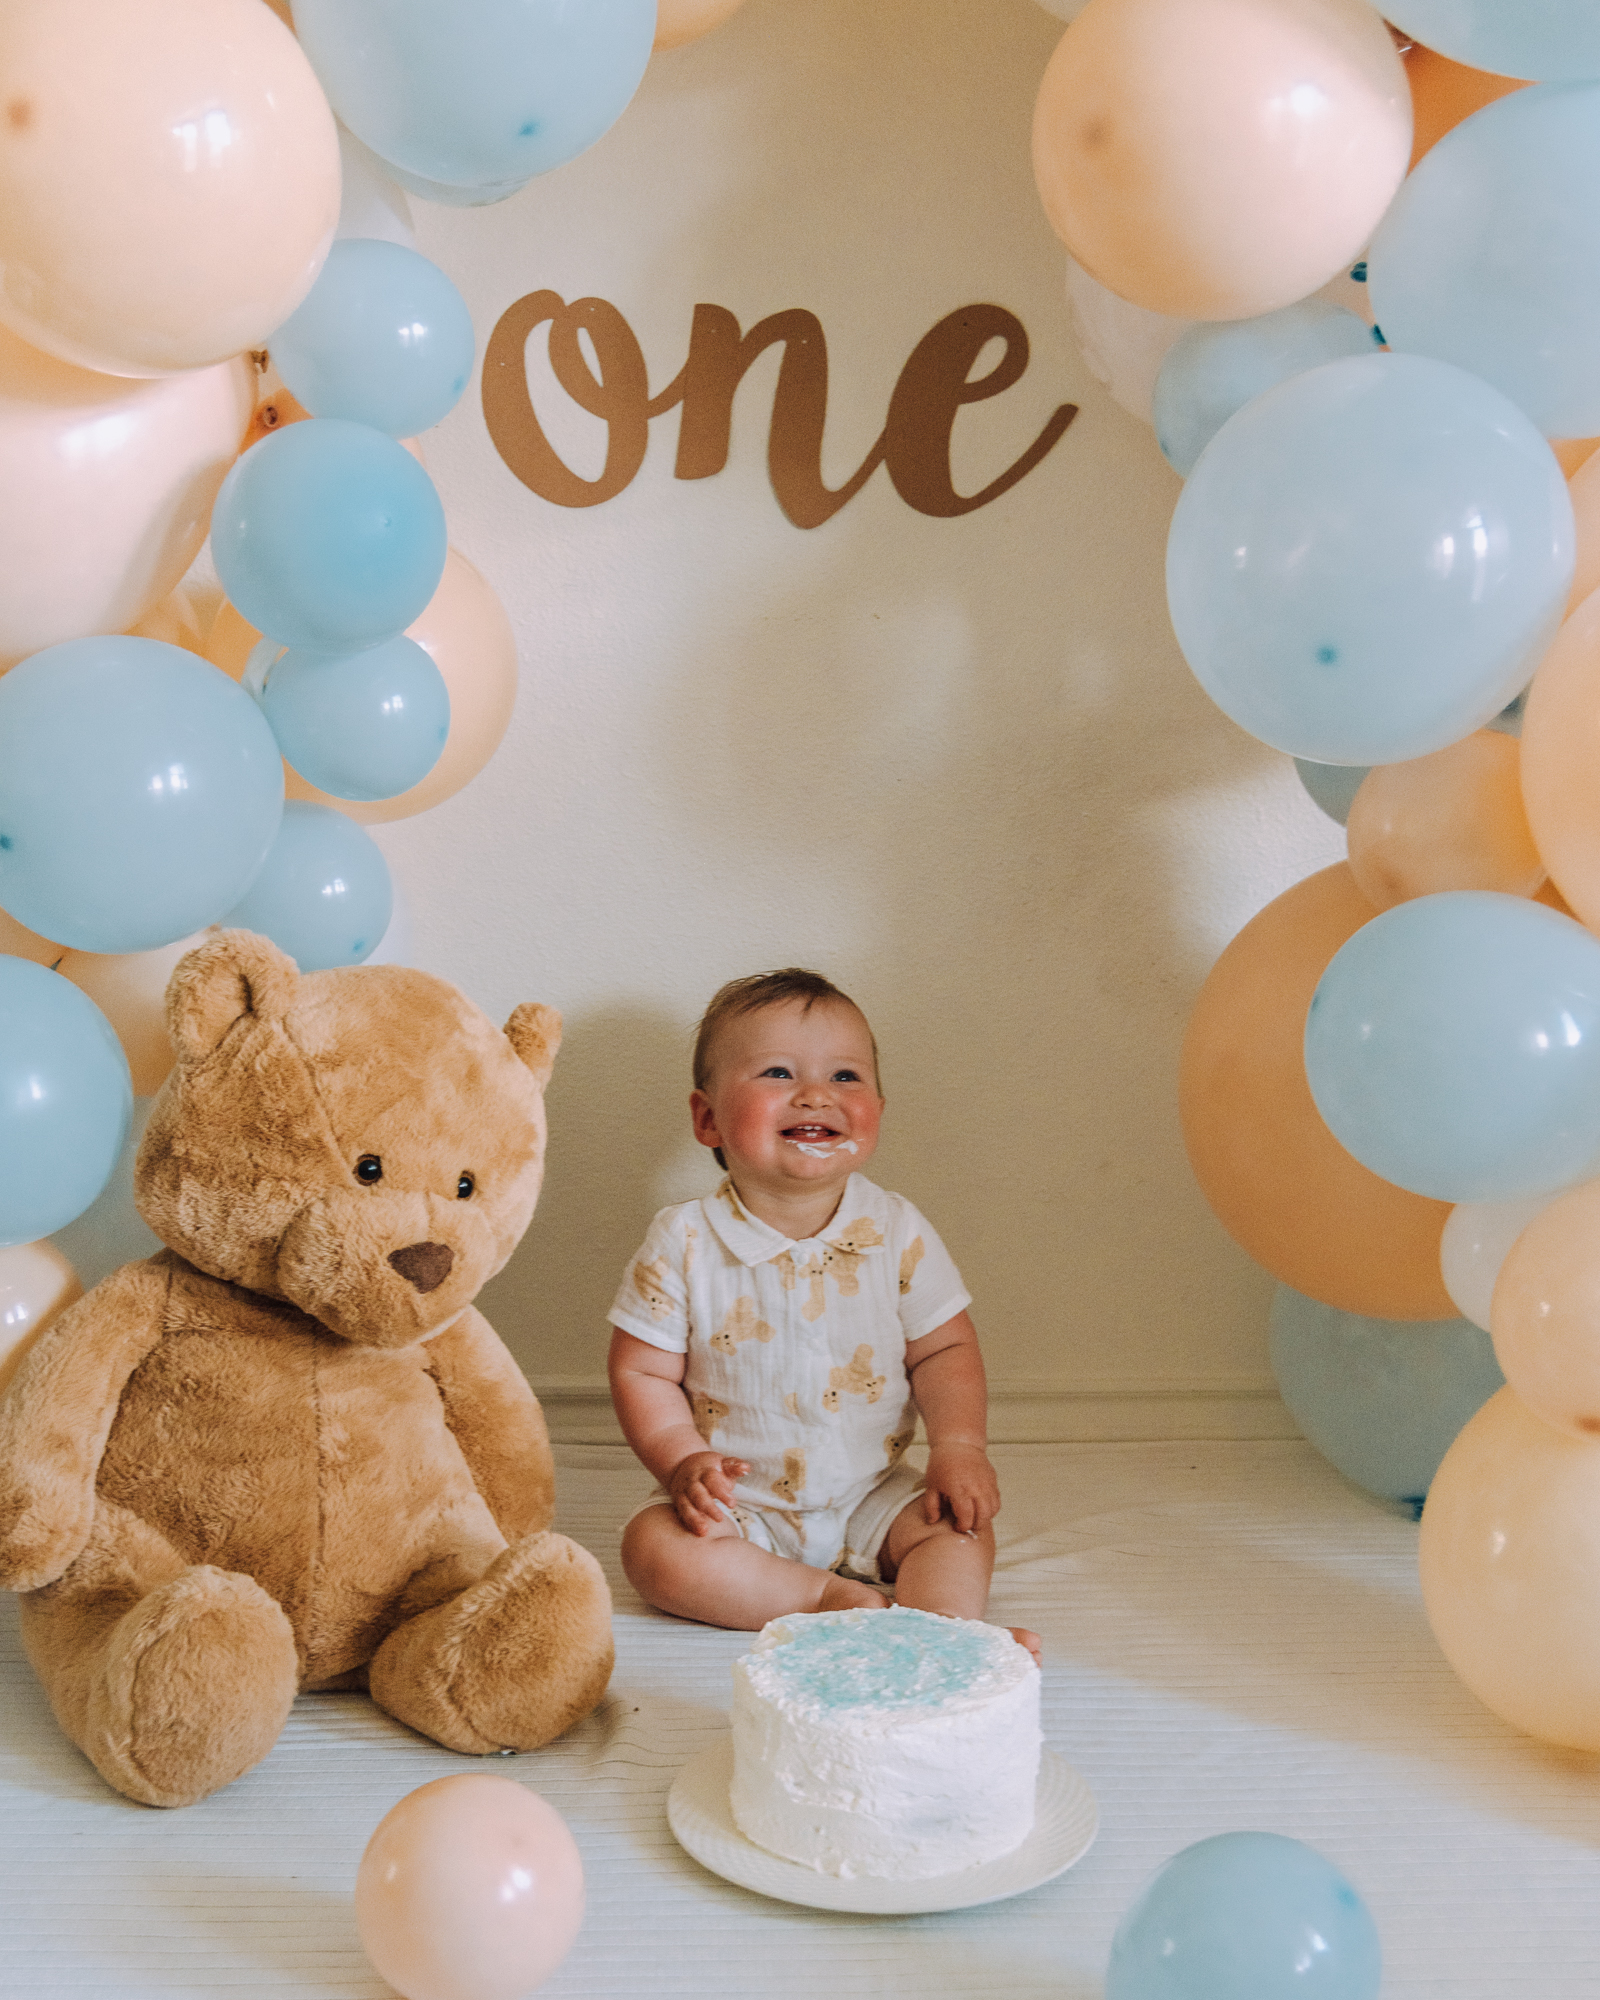 Baby one year birthday cake smash idea for a baby spring photoshoot with pastel colors and a teddy bear theme.